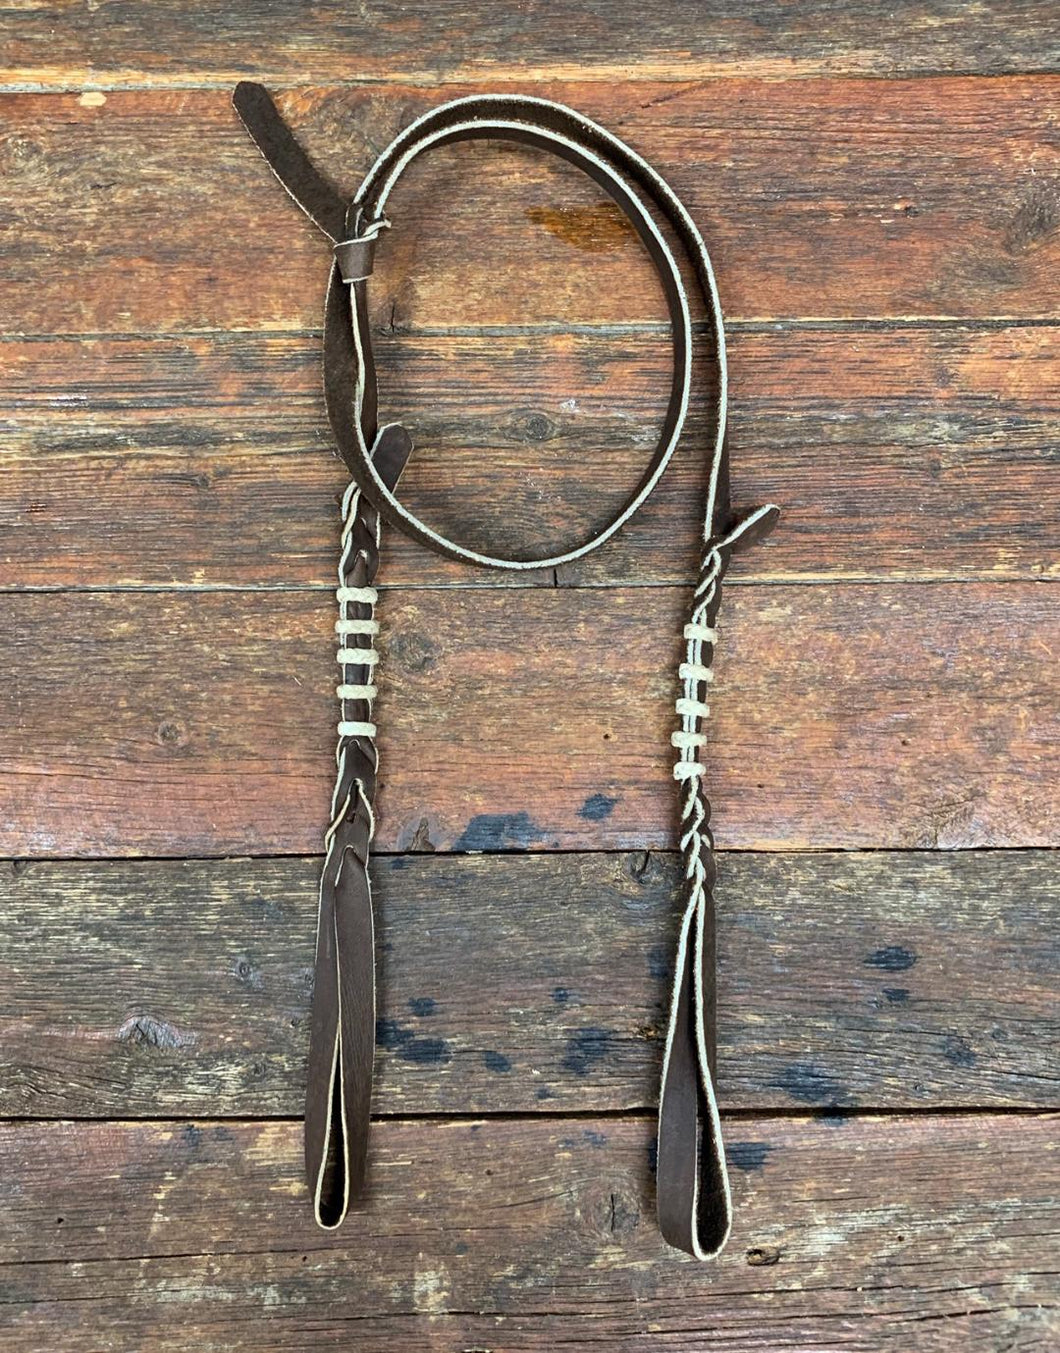 Bosal Hanger Chap Leather with Rawhide Accents